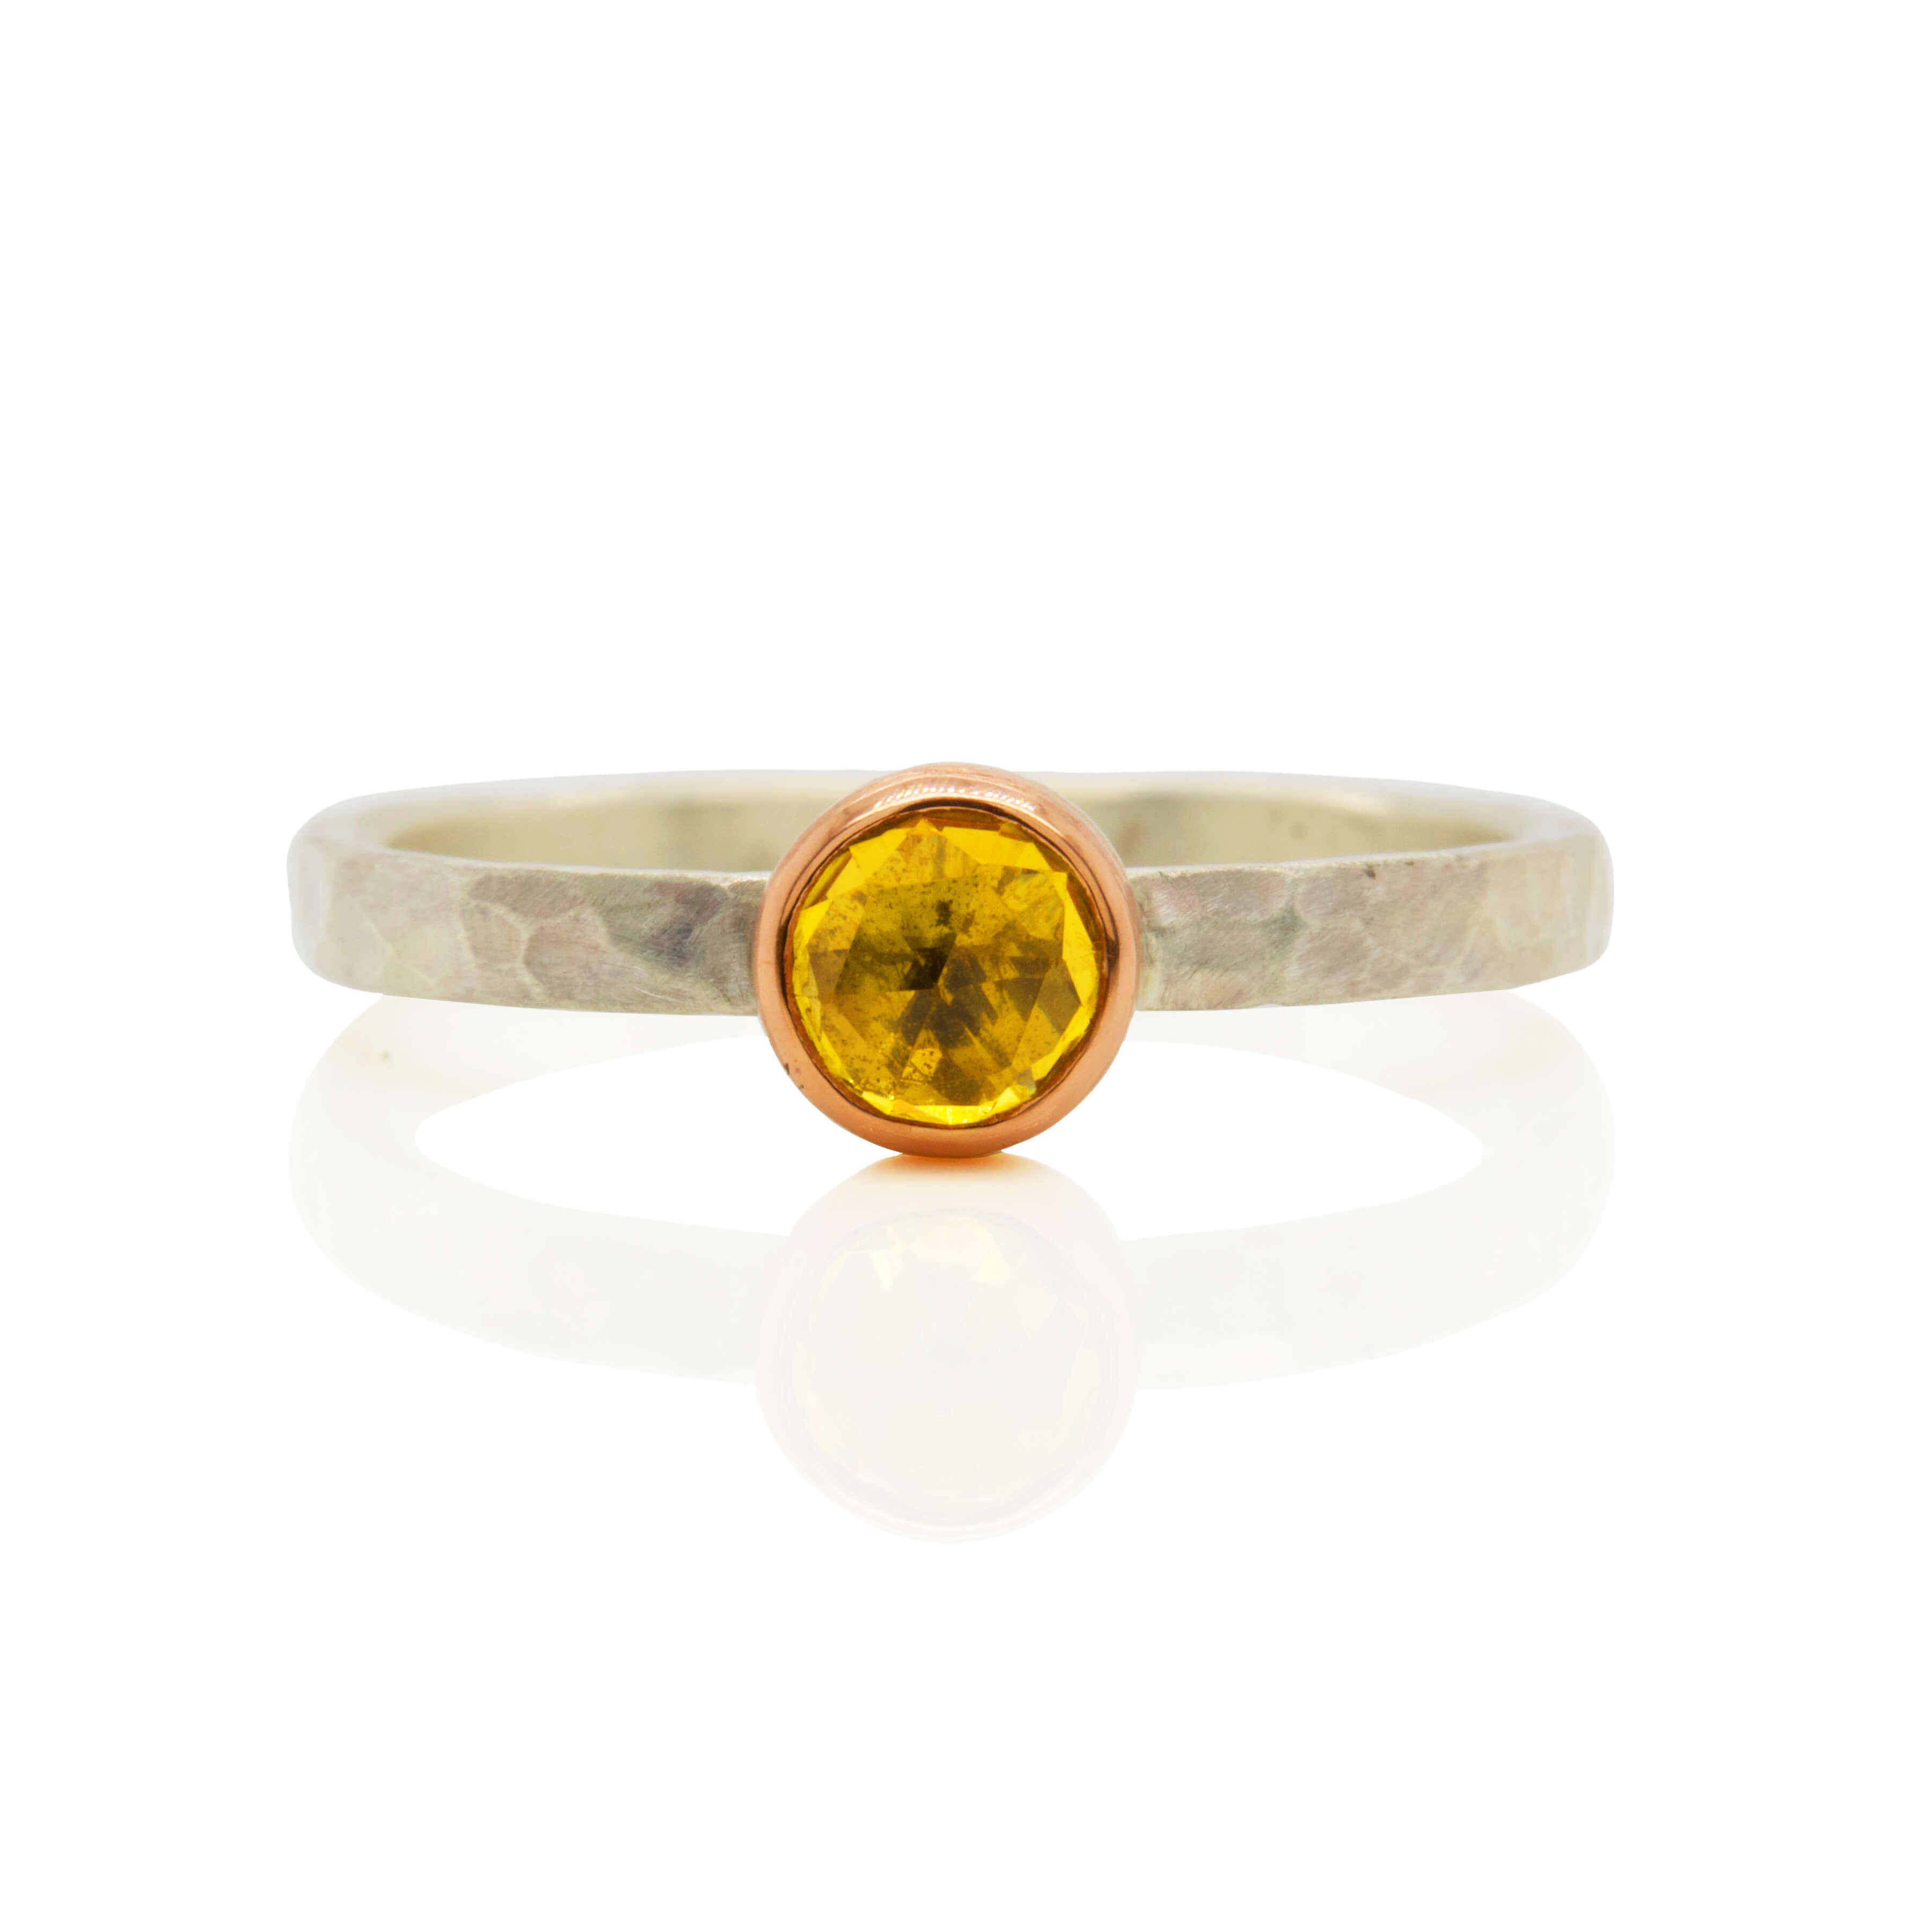 92% 8 Carat Yellow Sapphire Gemstone Sterling Silver Ring at Rs 499 in  Jaipur